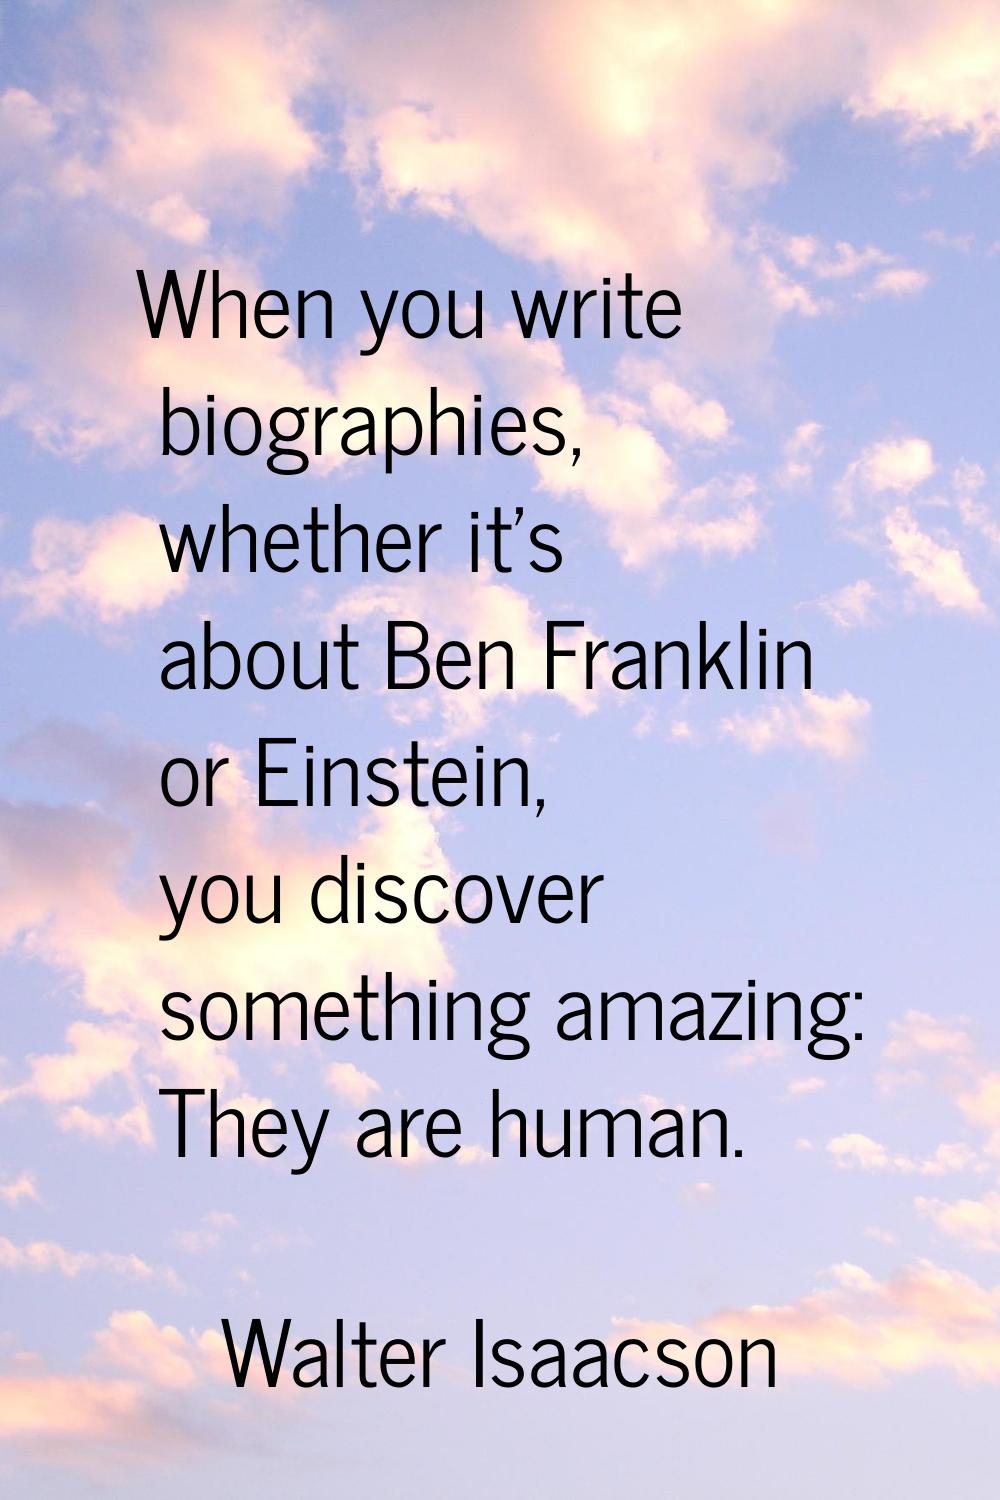 When you write biographies, whether it's about Ben Franklin or Einstein, you discover something ama